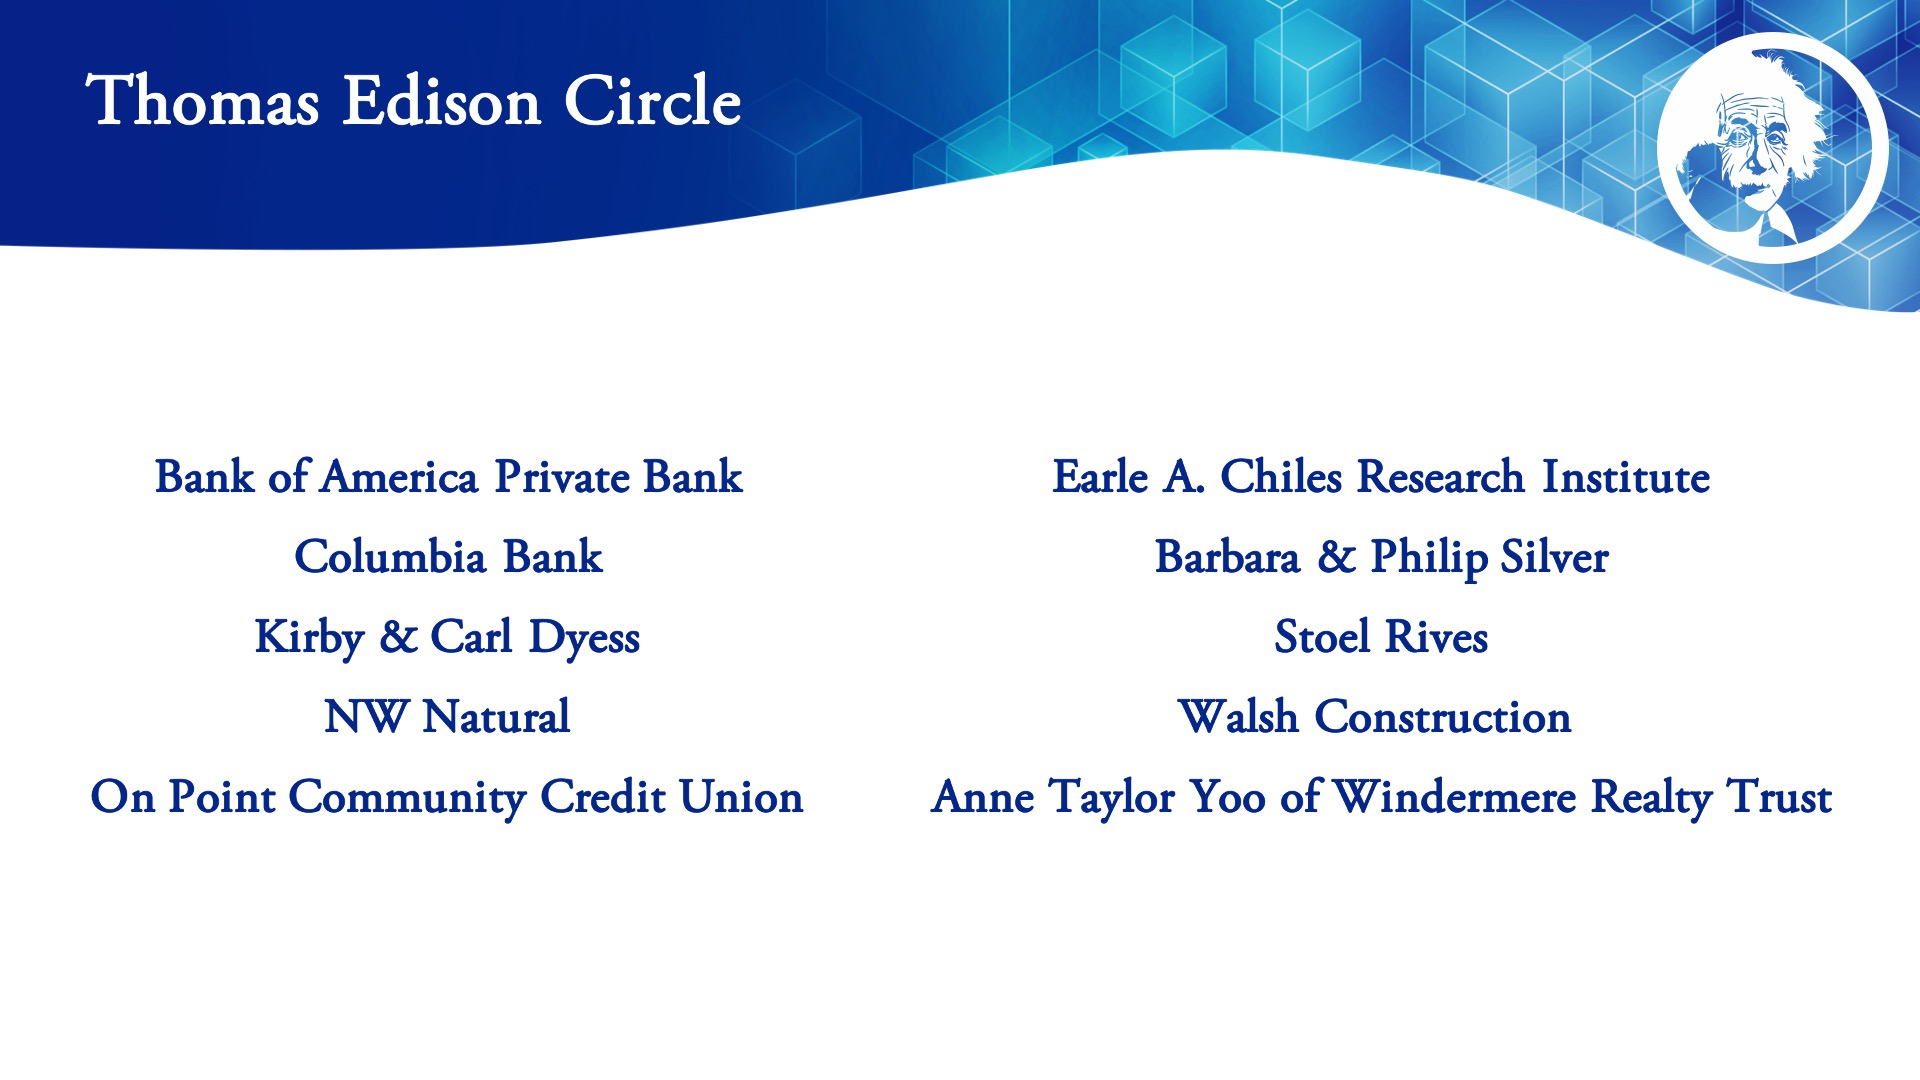 Thomas Edison Circle Sponsors: Bank of America Private Bank, Columbia Bank, Kirby & Carl Dyess, NW Natural, On Point Community Credit Union, Earle A. Chiles Research institute, Barbara & Philip Silver, Stoel Rives, Walsh Construction, Anne Taylor Yoo of Windermere Realty Trust